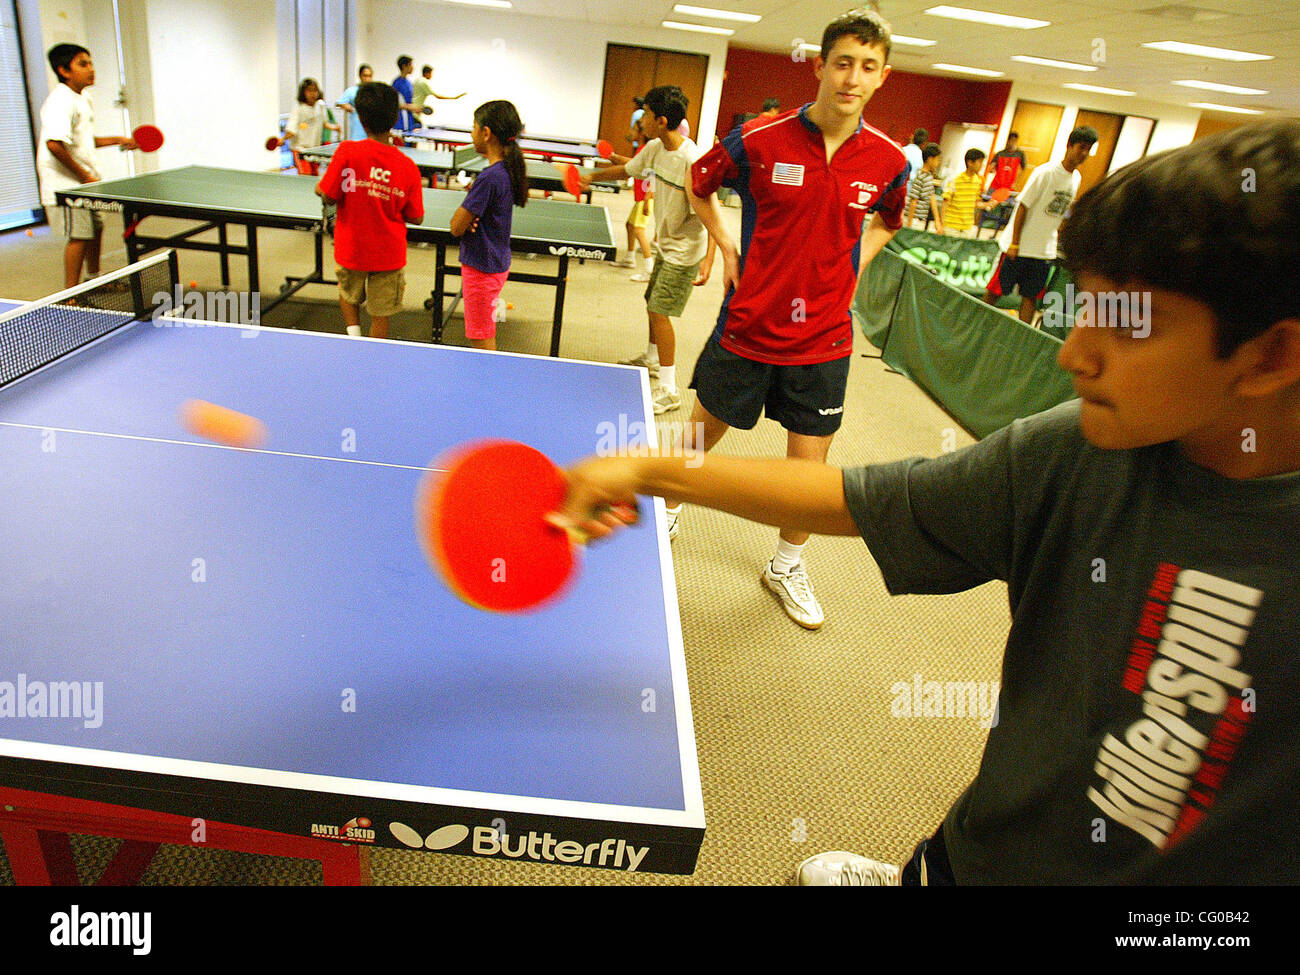 Paras Unadkat ,13,(right) practices under the watchfull eye of table tennis instructor Misha Kazantsev on Wednesday June 20, 2007 at the India Community Center in Milpitas, California. (Aric Crabb /The Oakland Tribune) Stock Photo